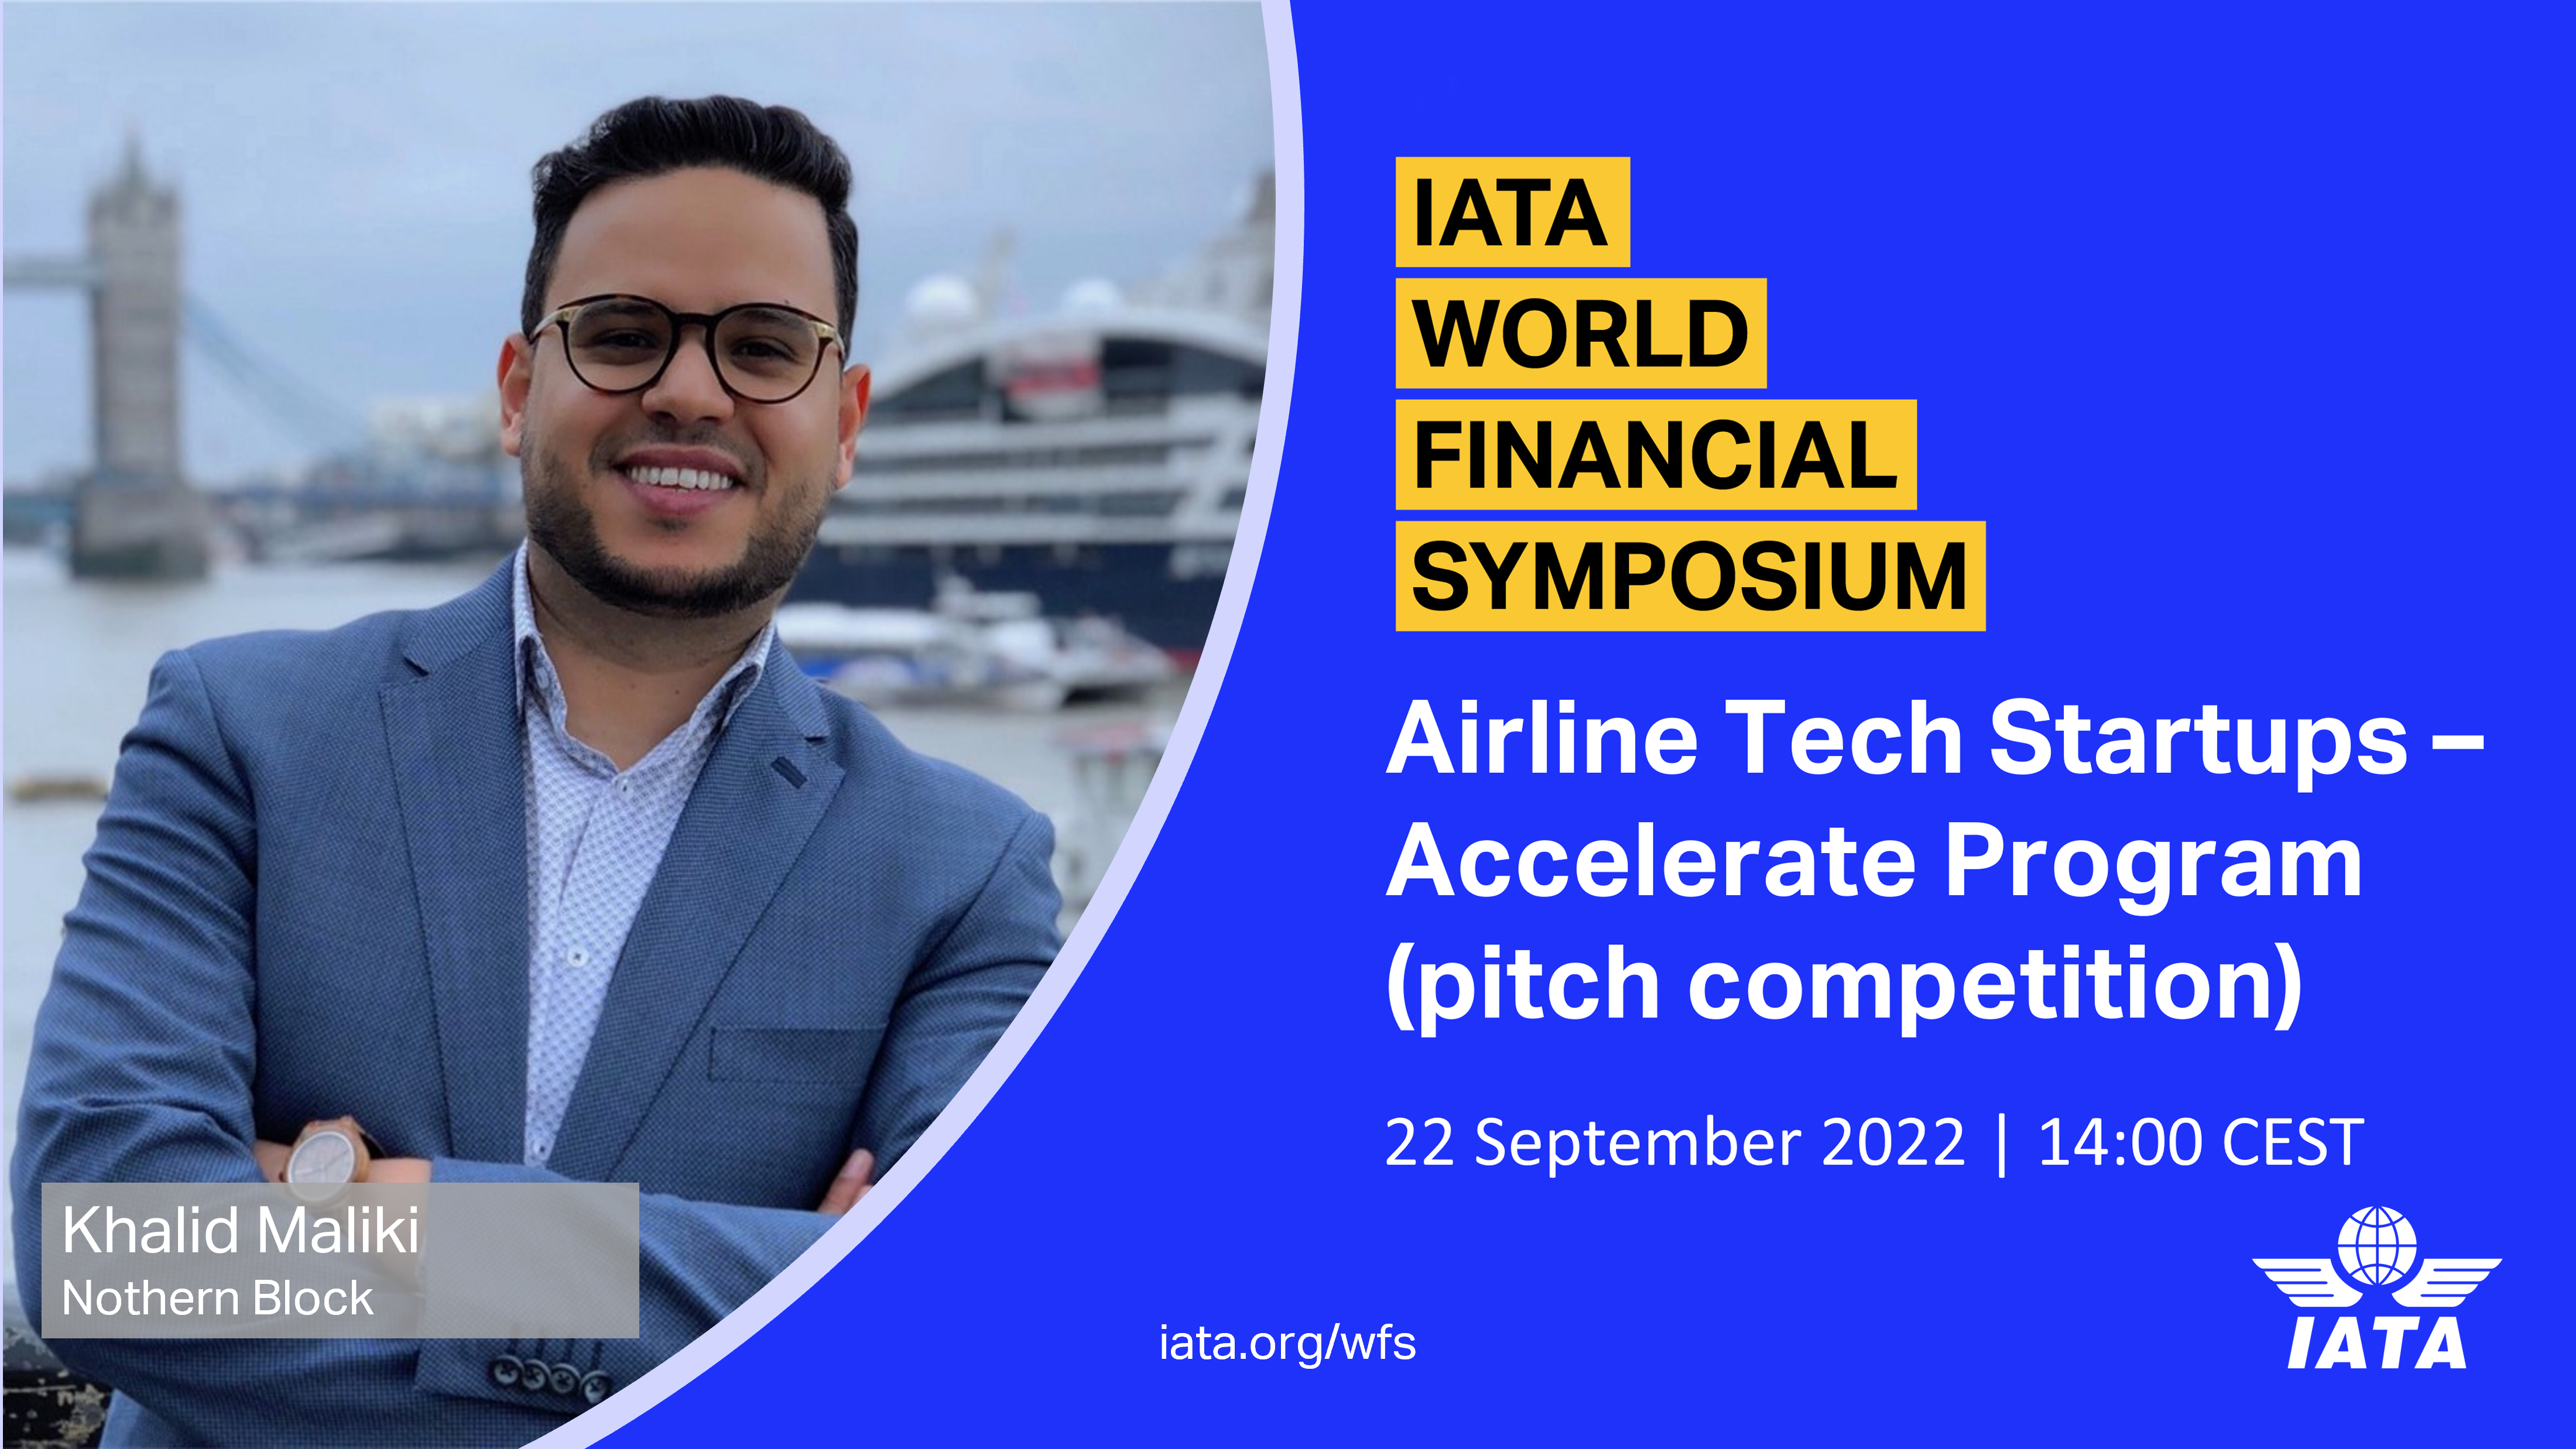 Northern Block is thrilled to be joining Accelerate@IATA 2022